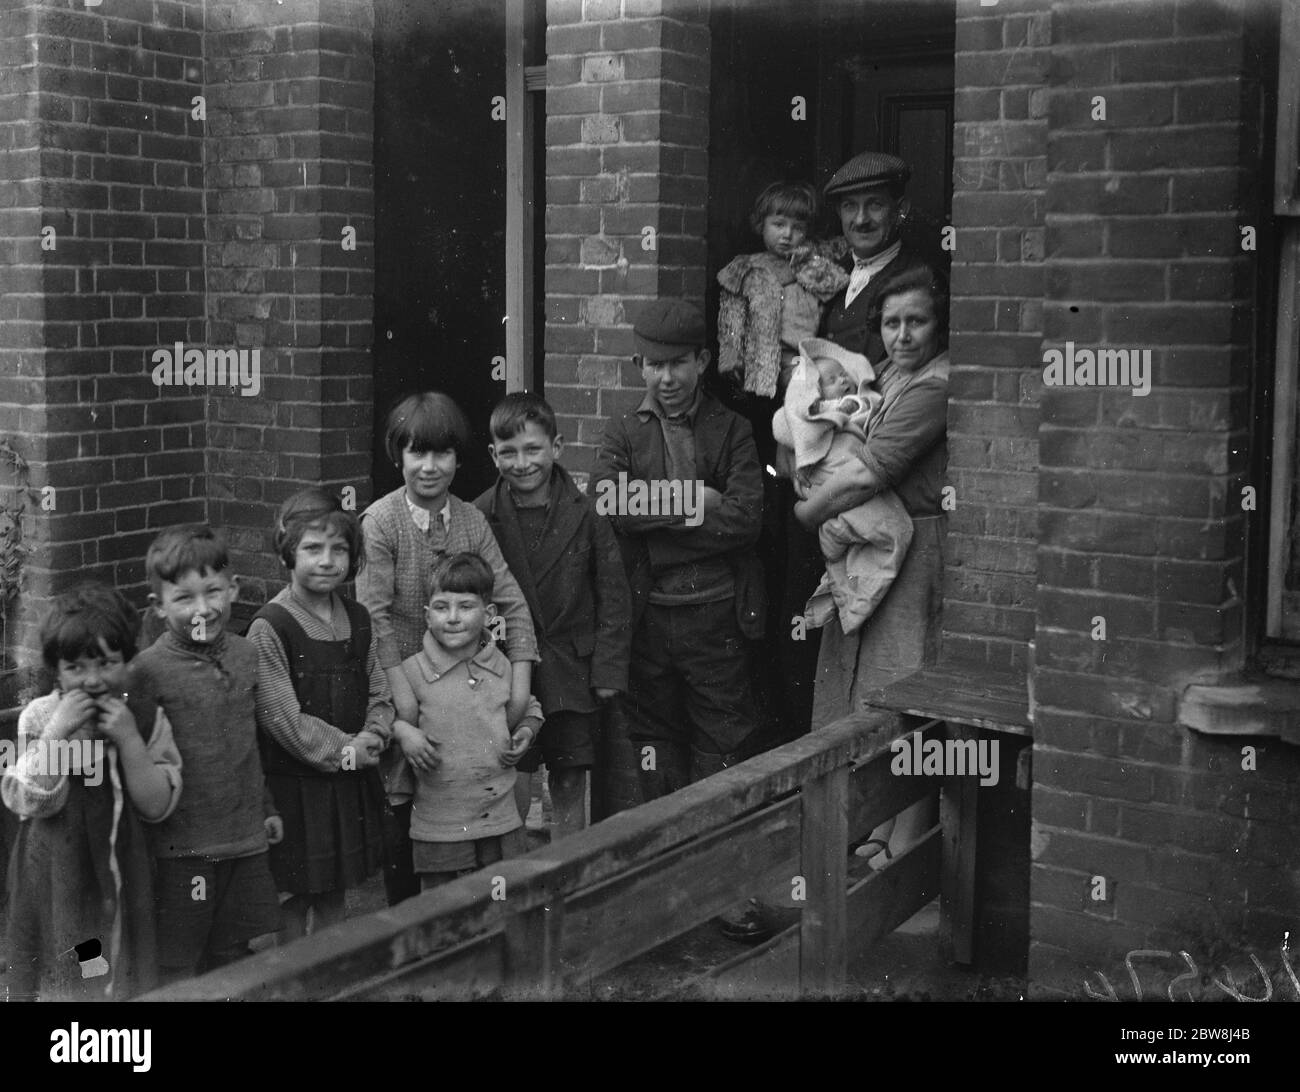 Sidcup, Consiglio, causa. 1935 Foto Stock